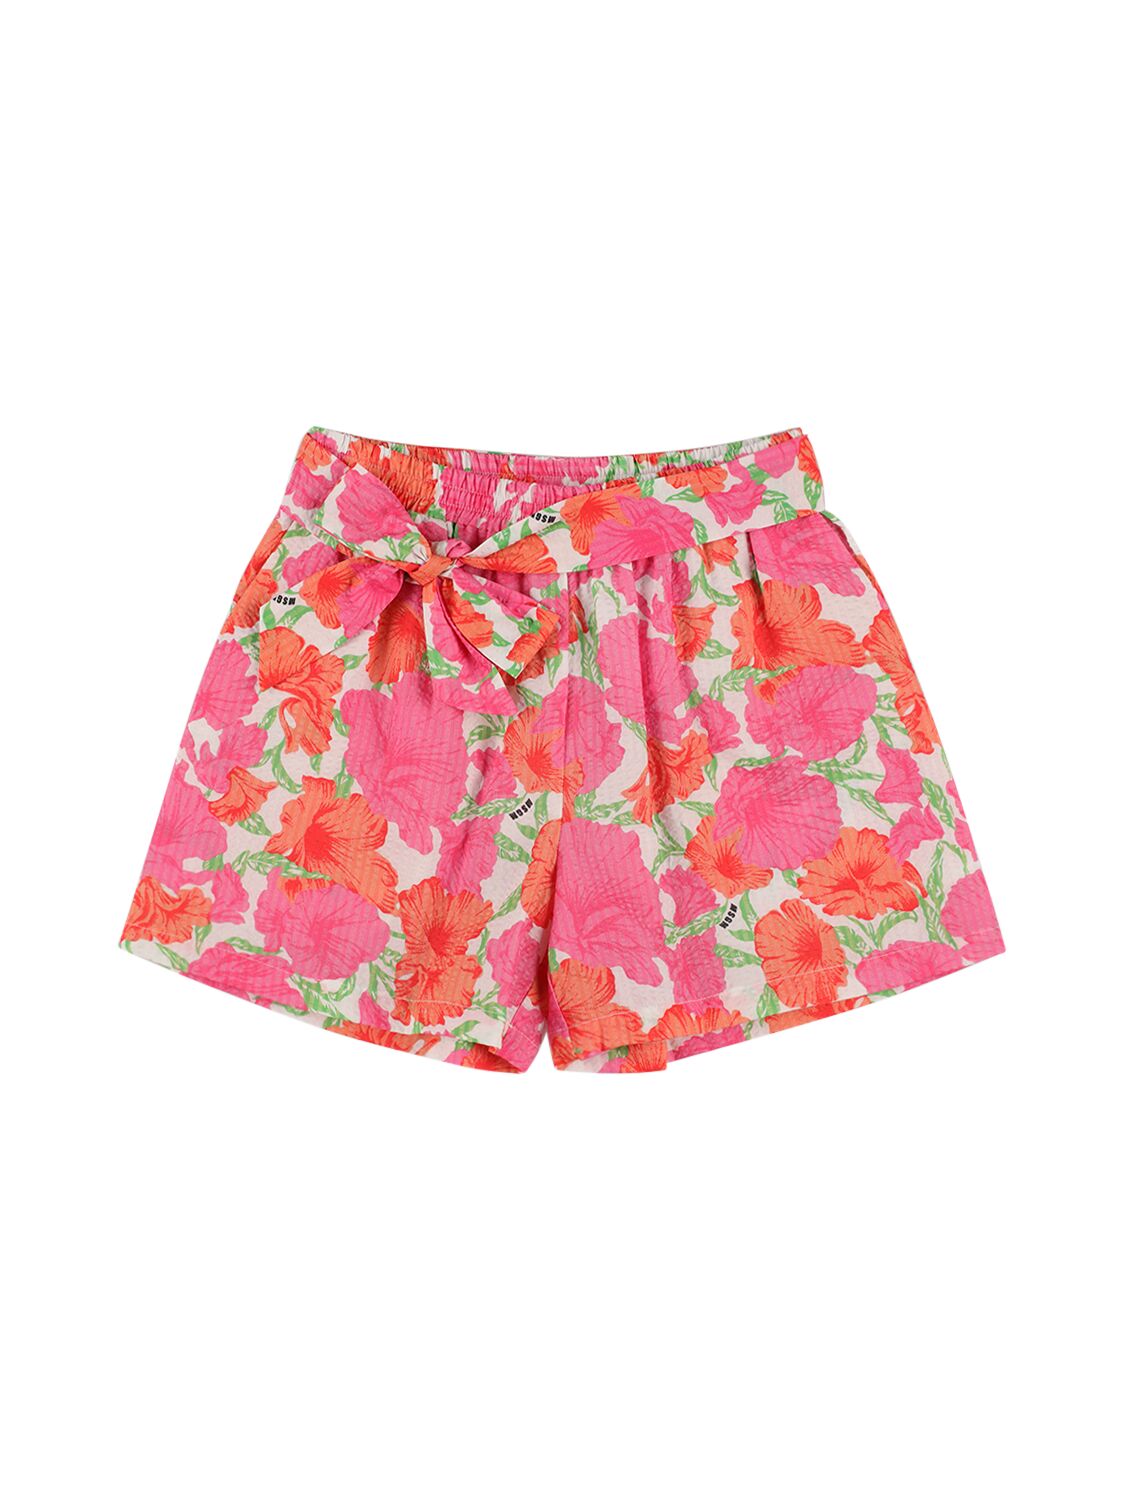 Msgm Kids' Flower Printed Shorts In Multicolor